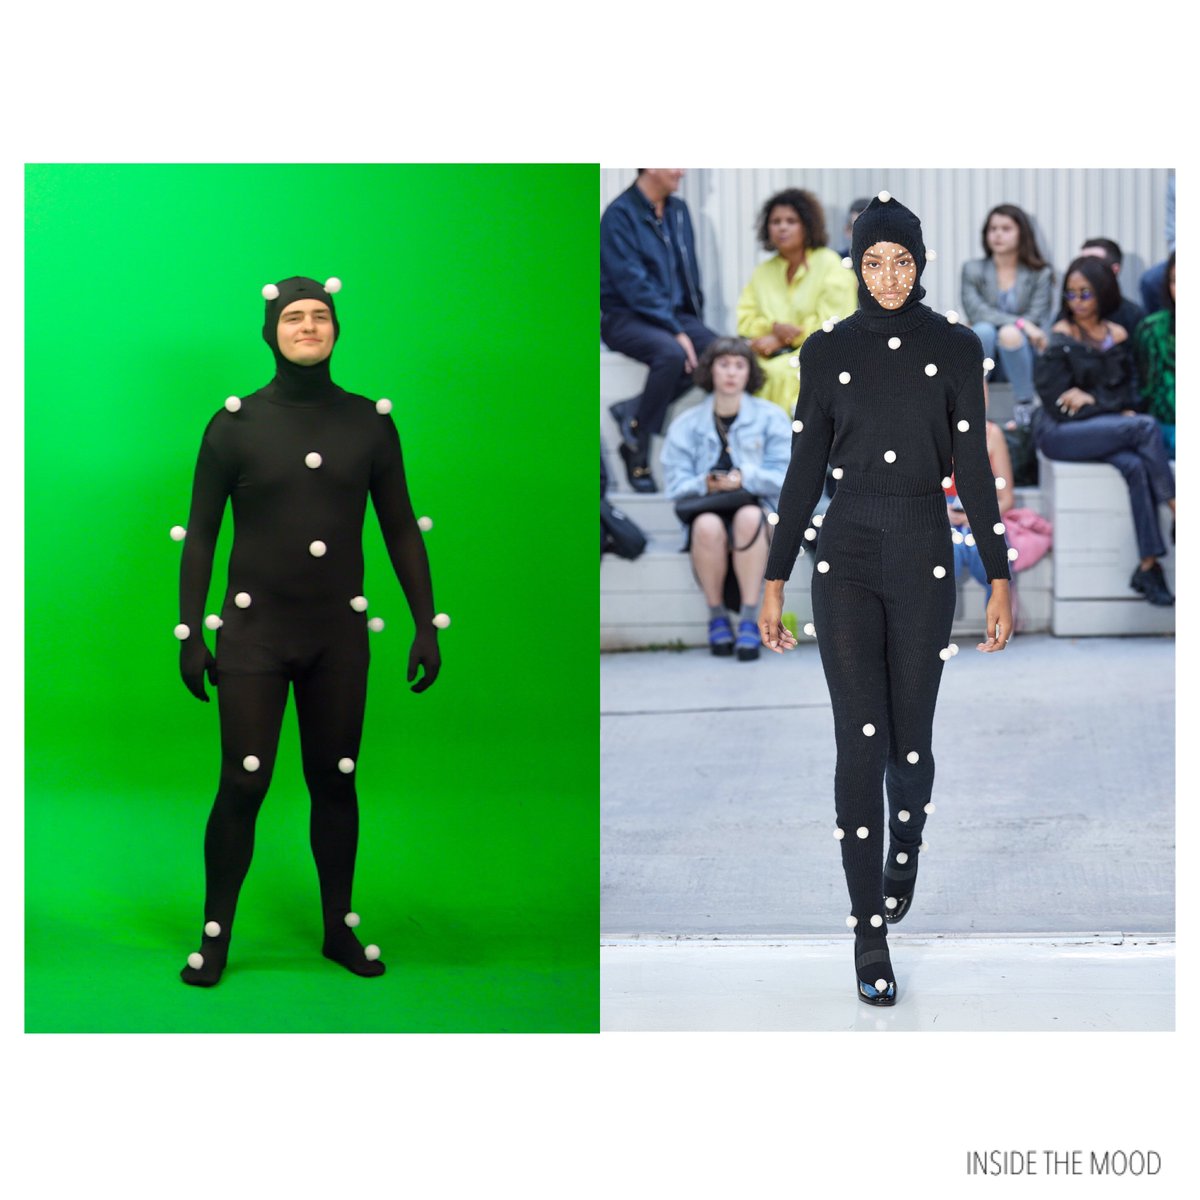 Mocap for Virtual Production | Shadow Motion Capture System